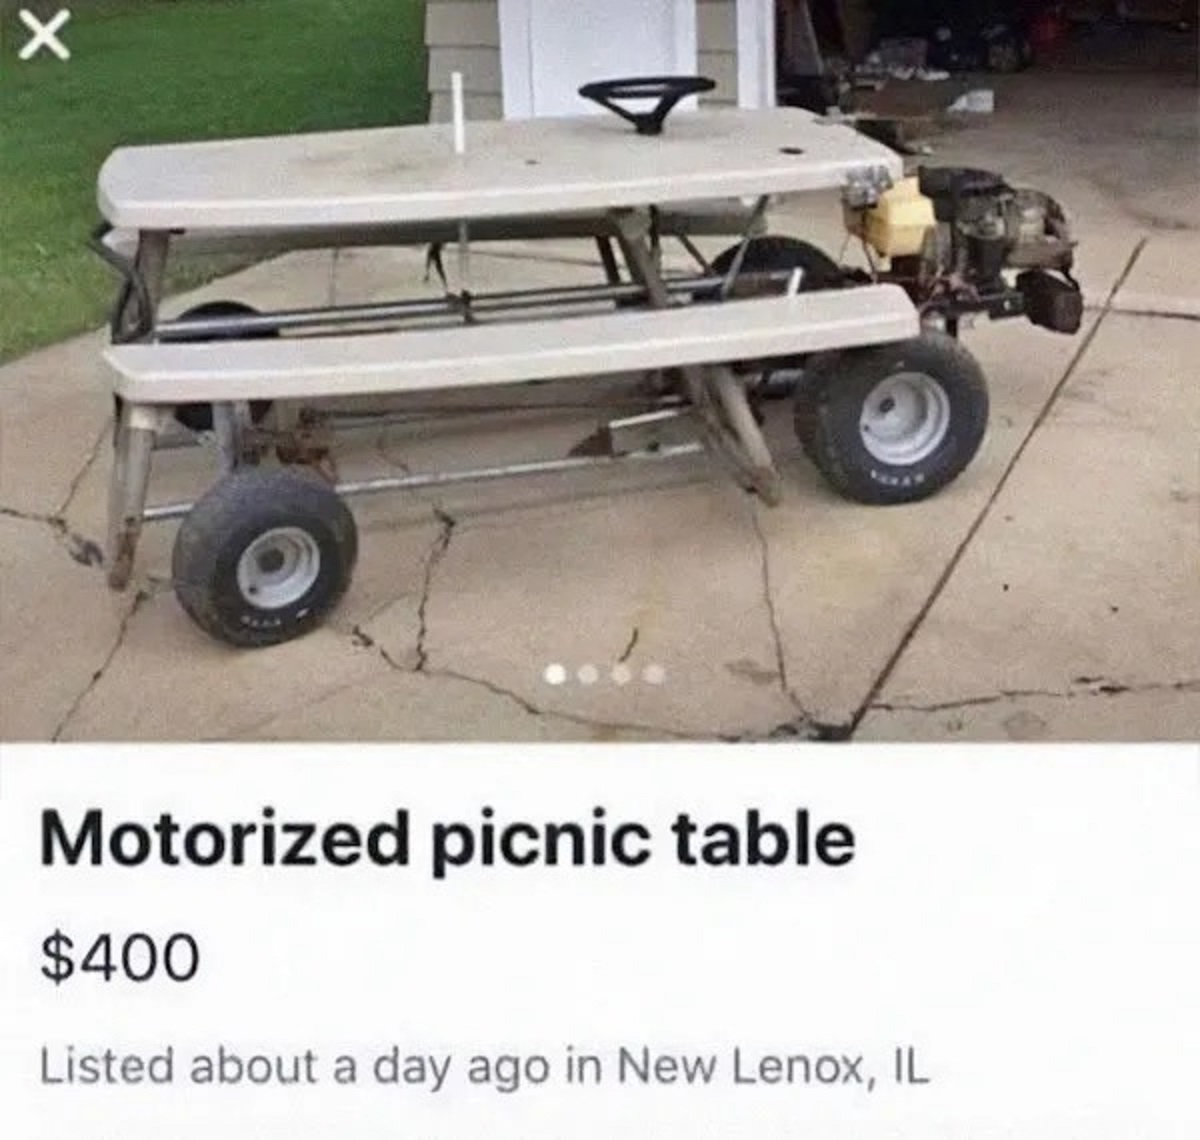 craigslist memes - Motorized picnic table $400 Listed about a day ago in New Lenox, Il